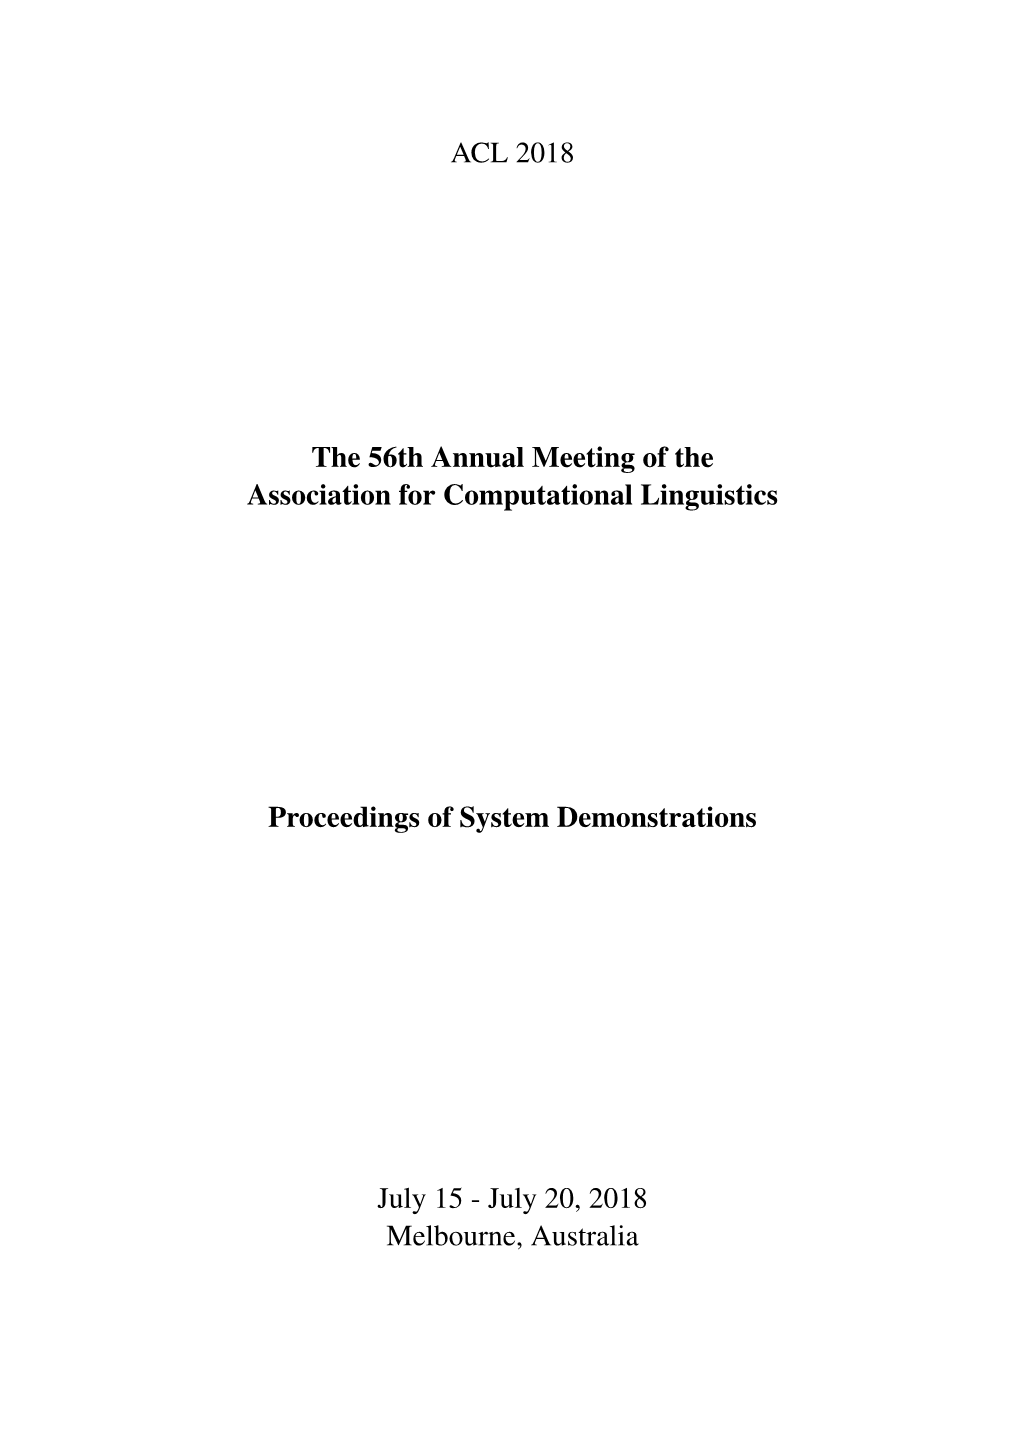 Proceedings of the 55Th Annual Meeting of the Association for Computational Linguistics